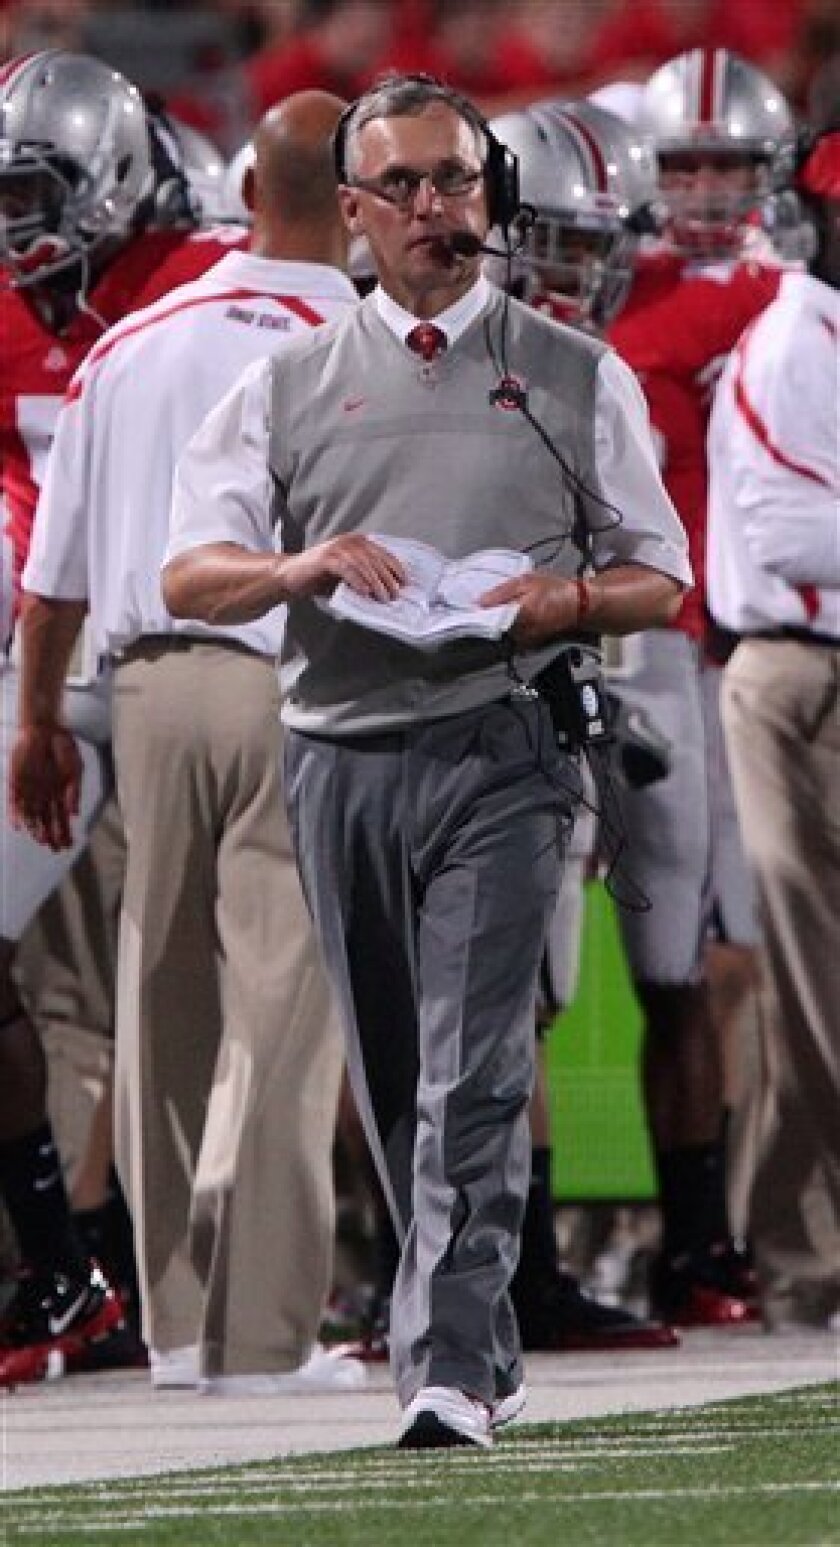 Ohio State coach Jim Tressel works the sidelines against Marshall during the second half of an NCAA college football game Thursday, Sept. 2, 2010, in Columbus, Ohio. Ohio State beat Marshall 45-7. (AP Photo/Terry Gilliam)